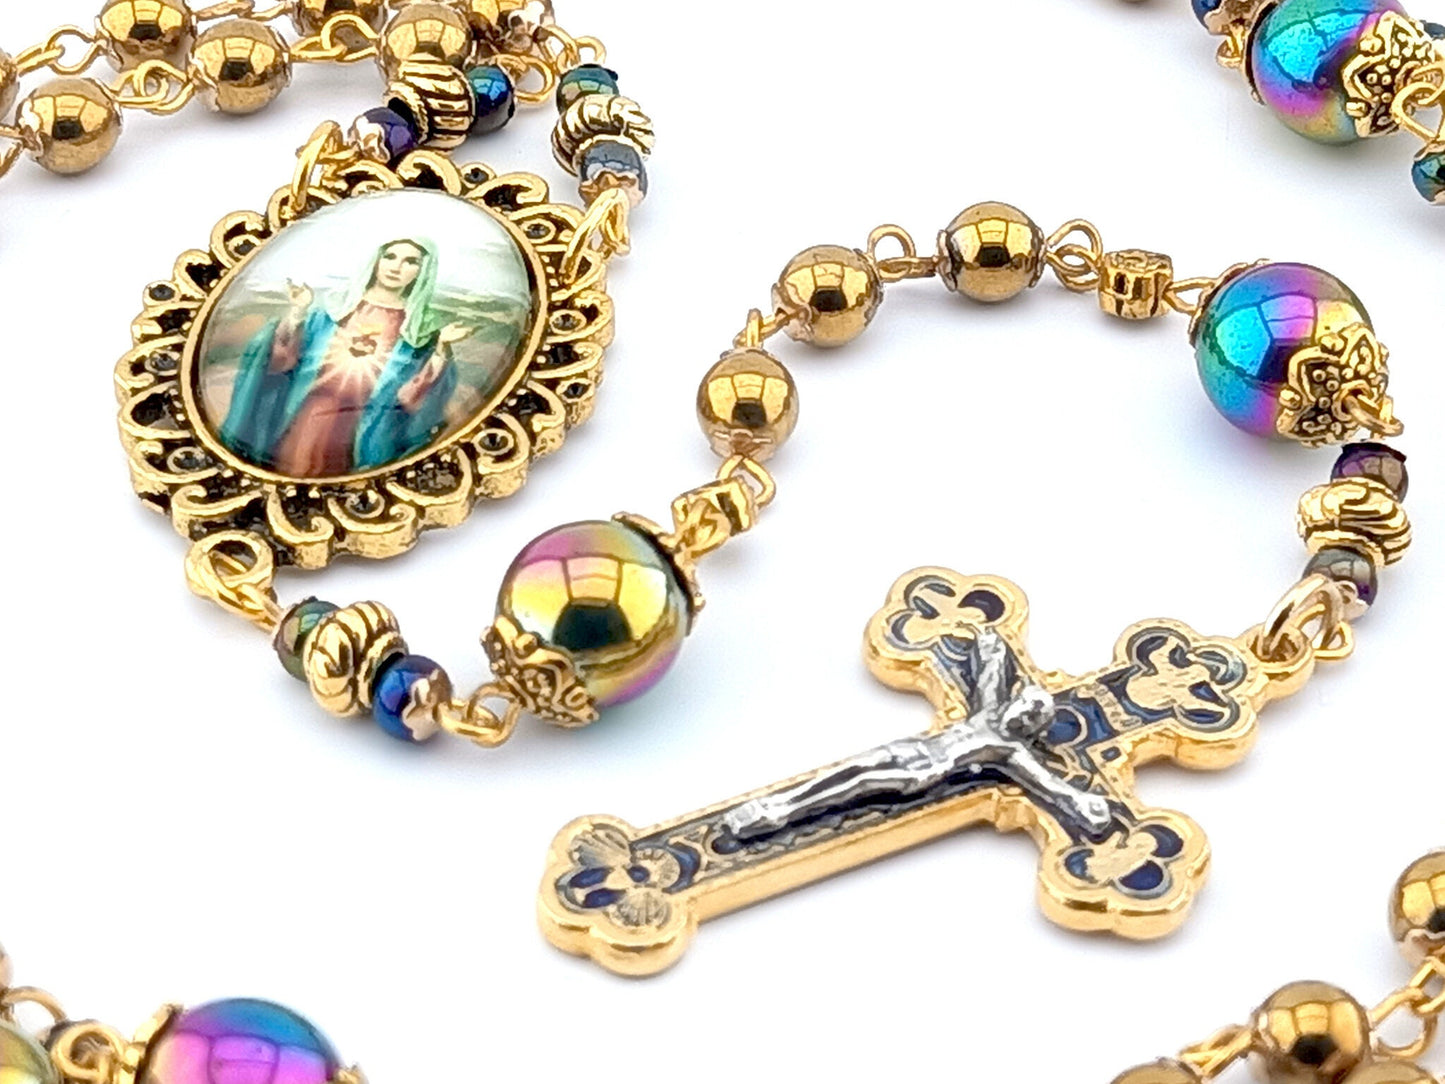 Immaculate Heart of Mary unique rosary beads with gold hematite and petrol beads, gold and blue crucifix and picture centre medal.